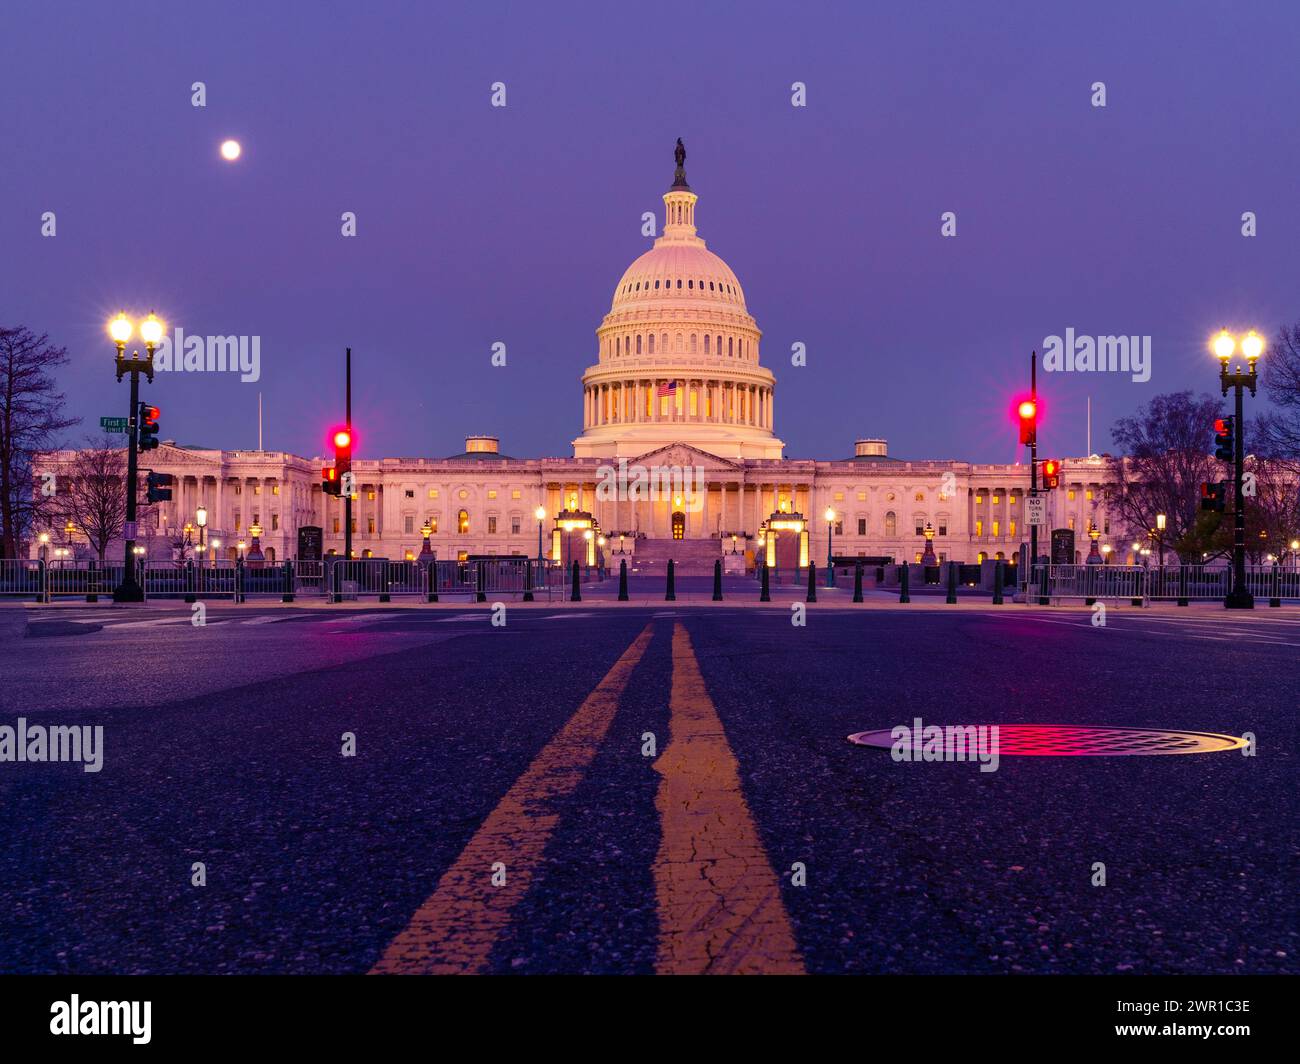 Early Morning at the US Capital Stock Photo